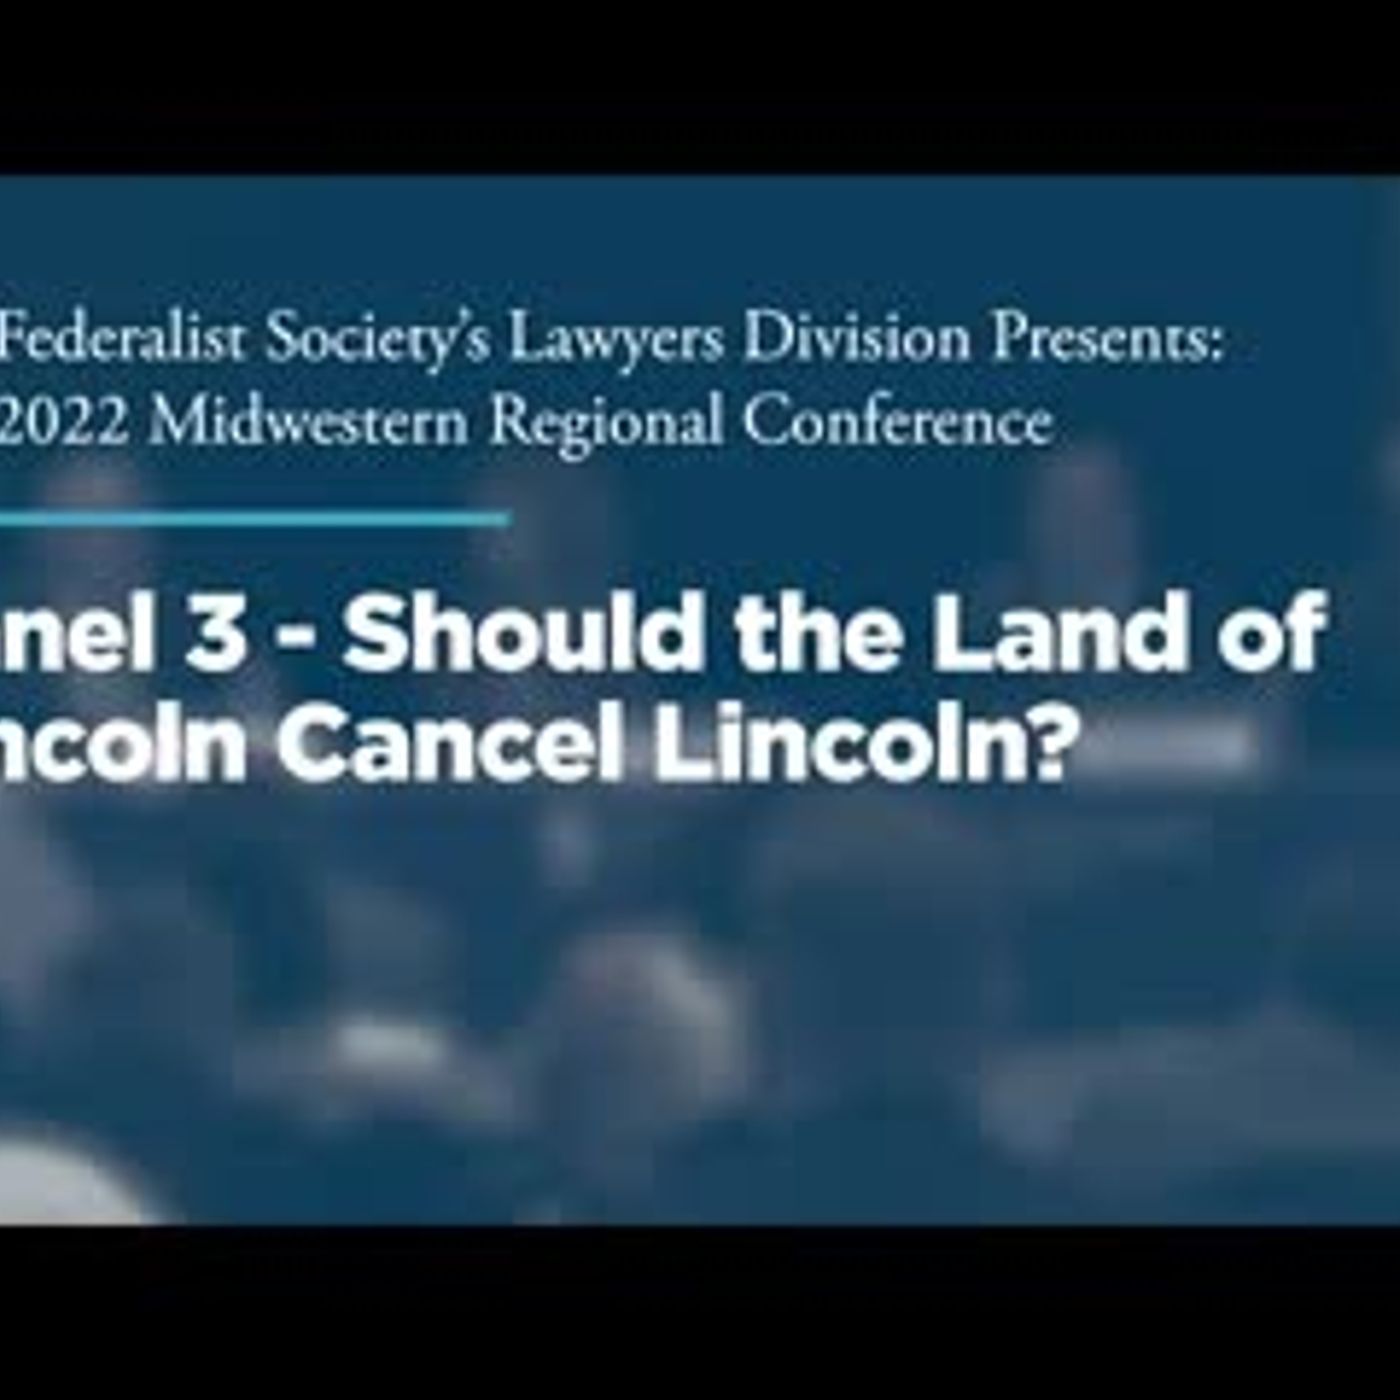 Panel 3 - Should the Land of Lincoln Cancel Lincoln?